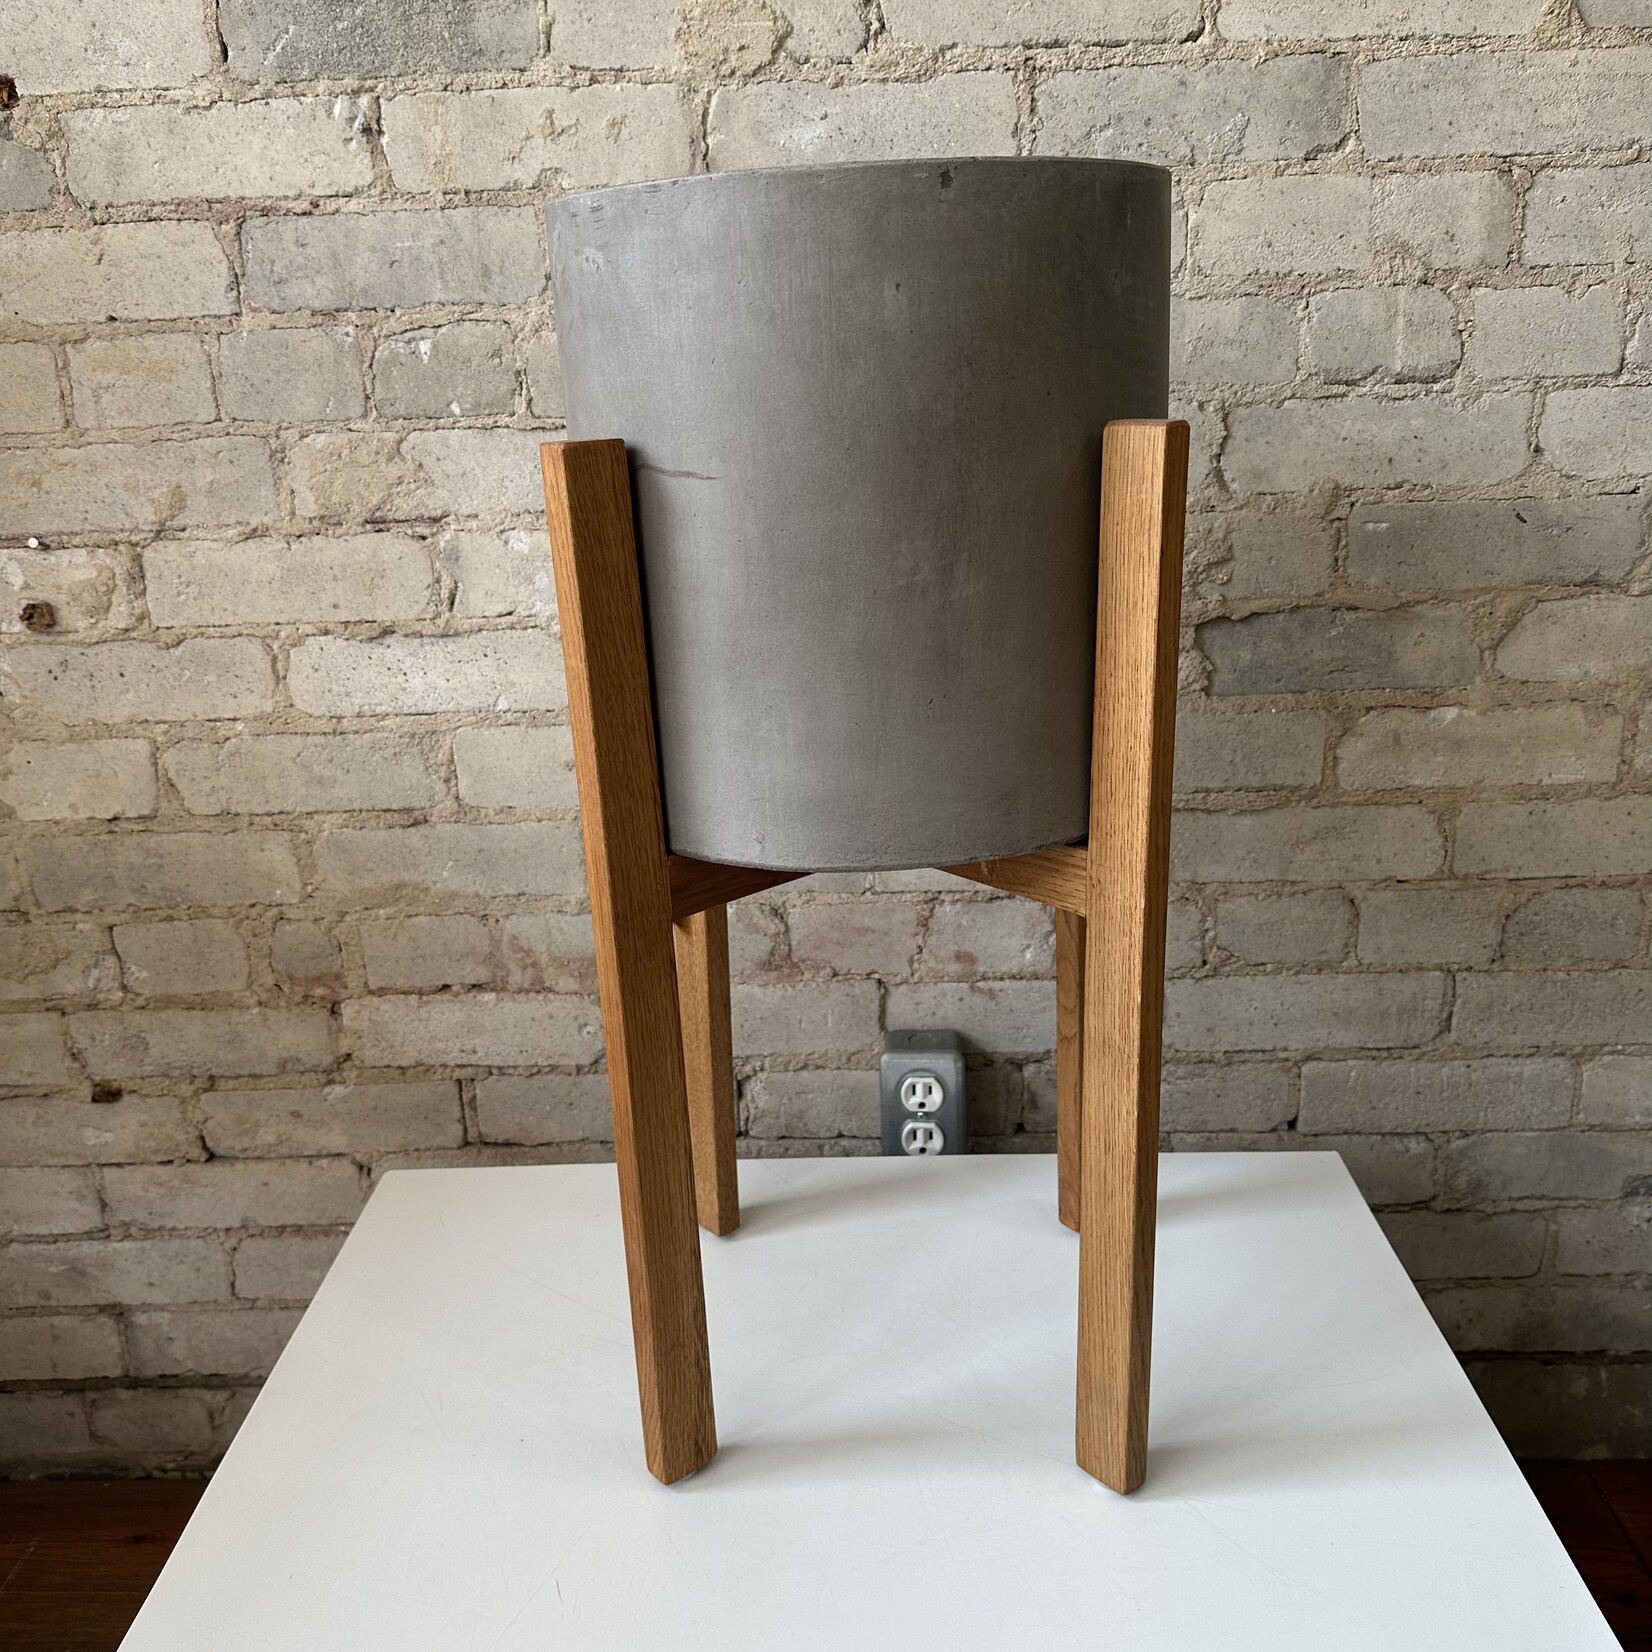 Concrete Pot with Stand - BERLIN (fits 10")